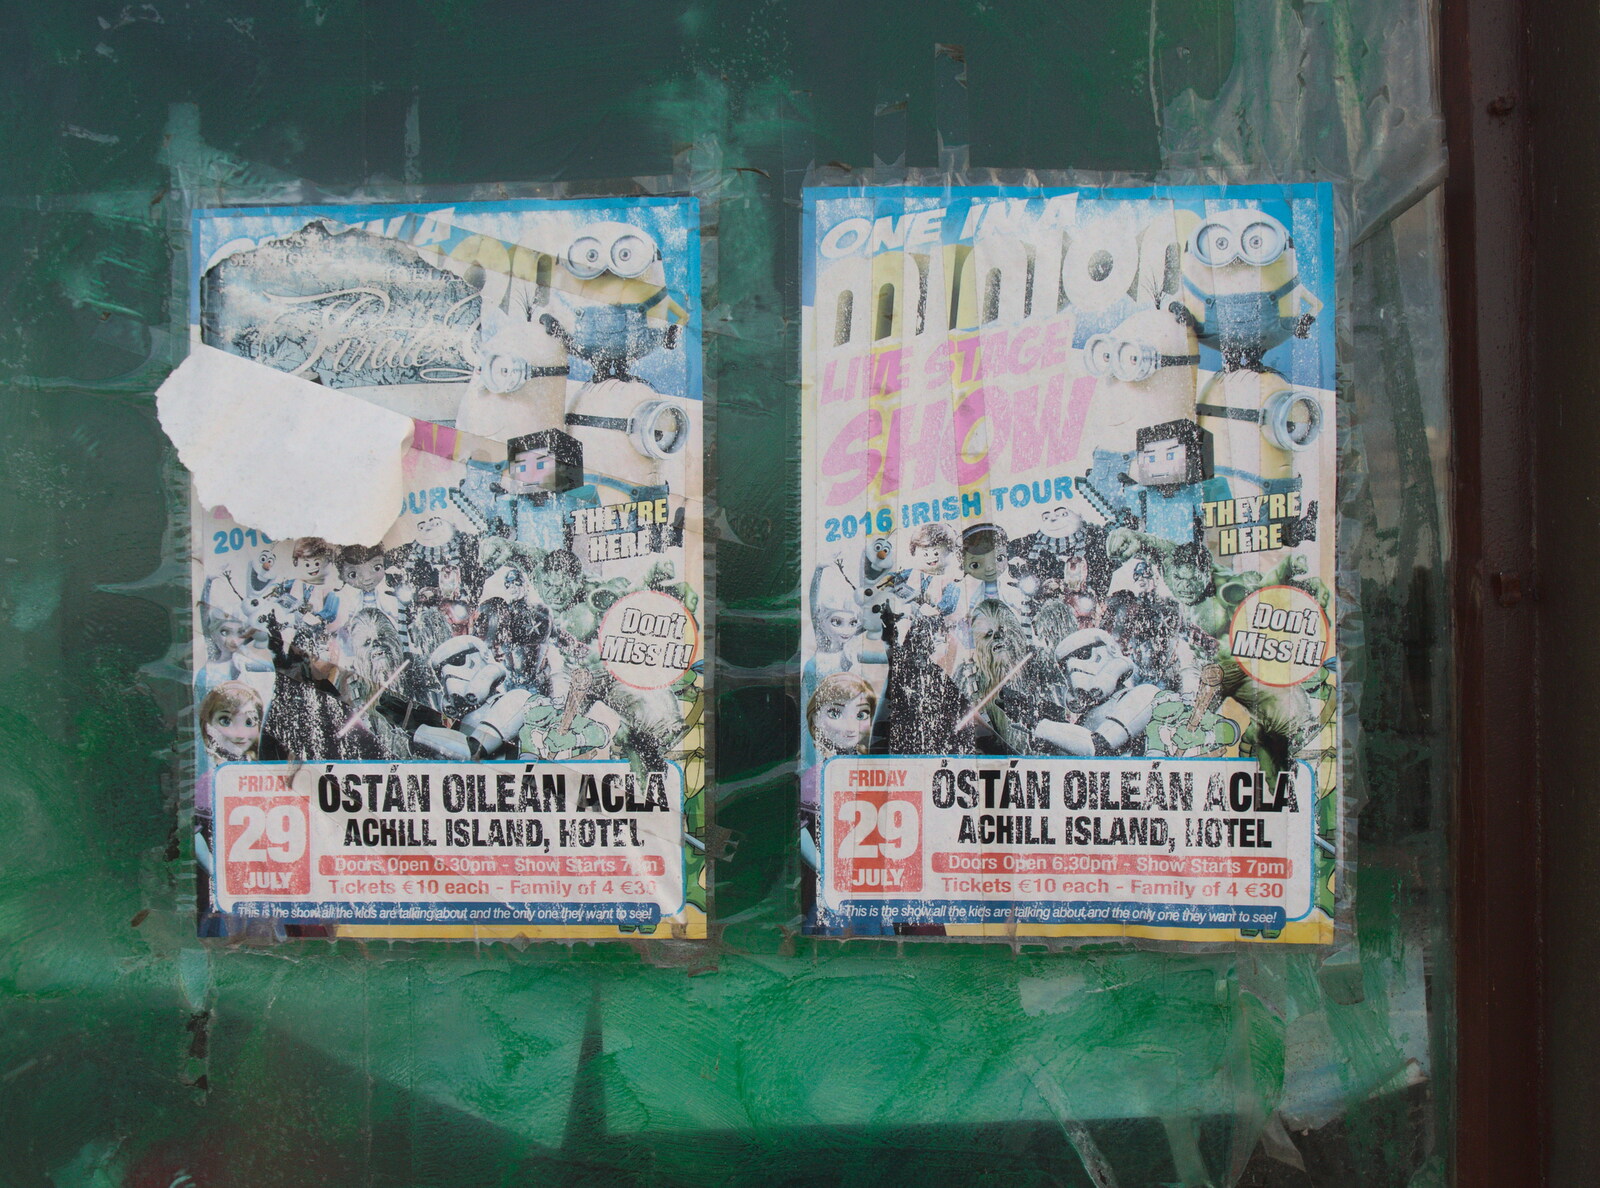 Old posters stuck up in a window from Surfing Achill Island, Oileán Acla, Maigh Eo, Ireland - 8th August 2017